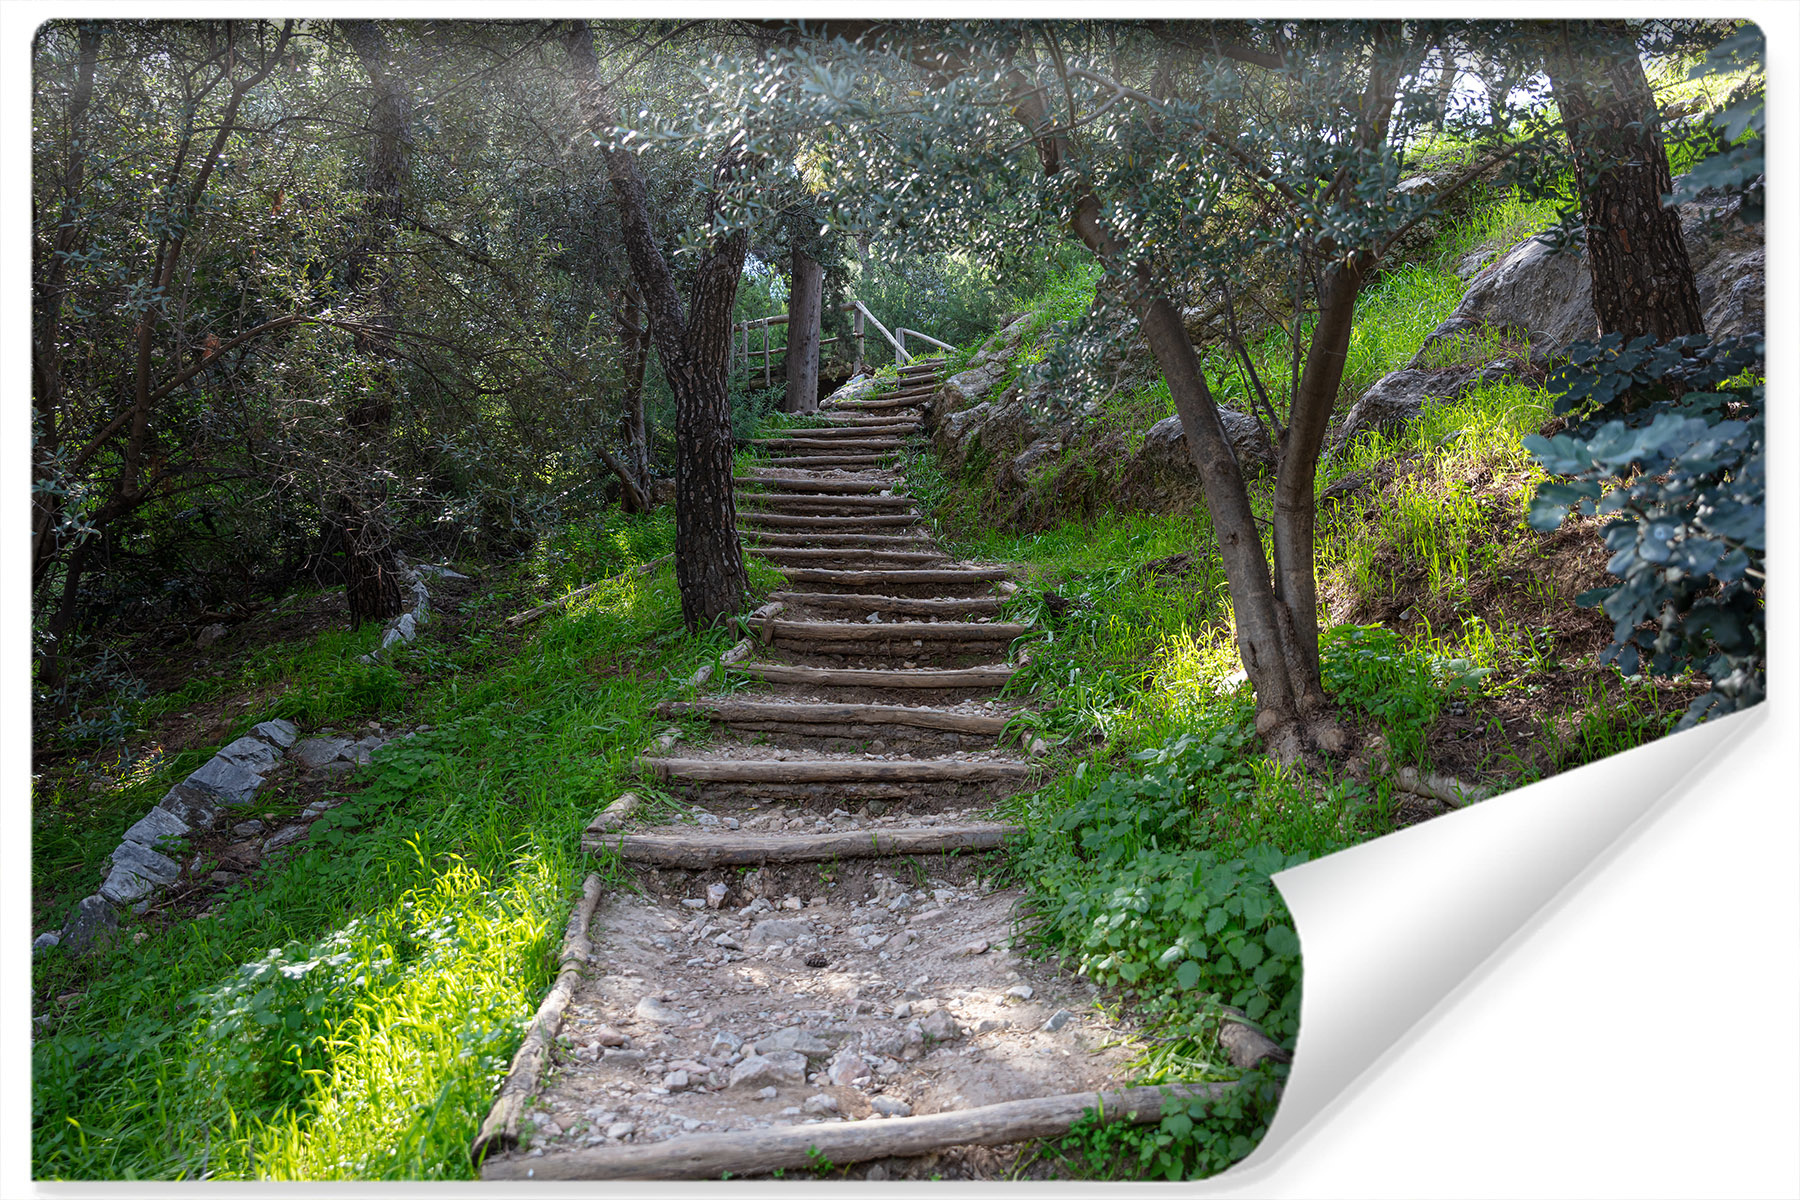 Photo wallpaper Stairway in the Woods 3D Non-woven 104 x 70.5 cm FT-3413-VEM